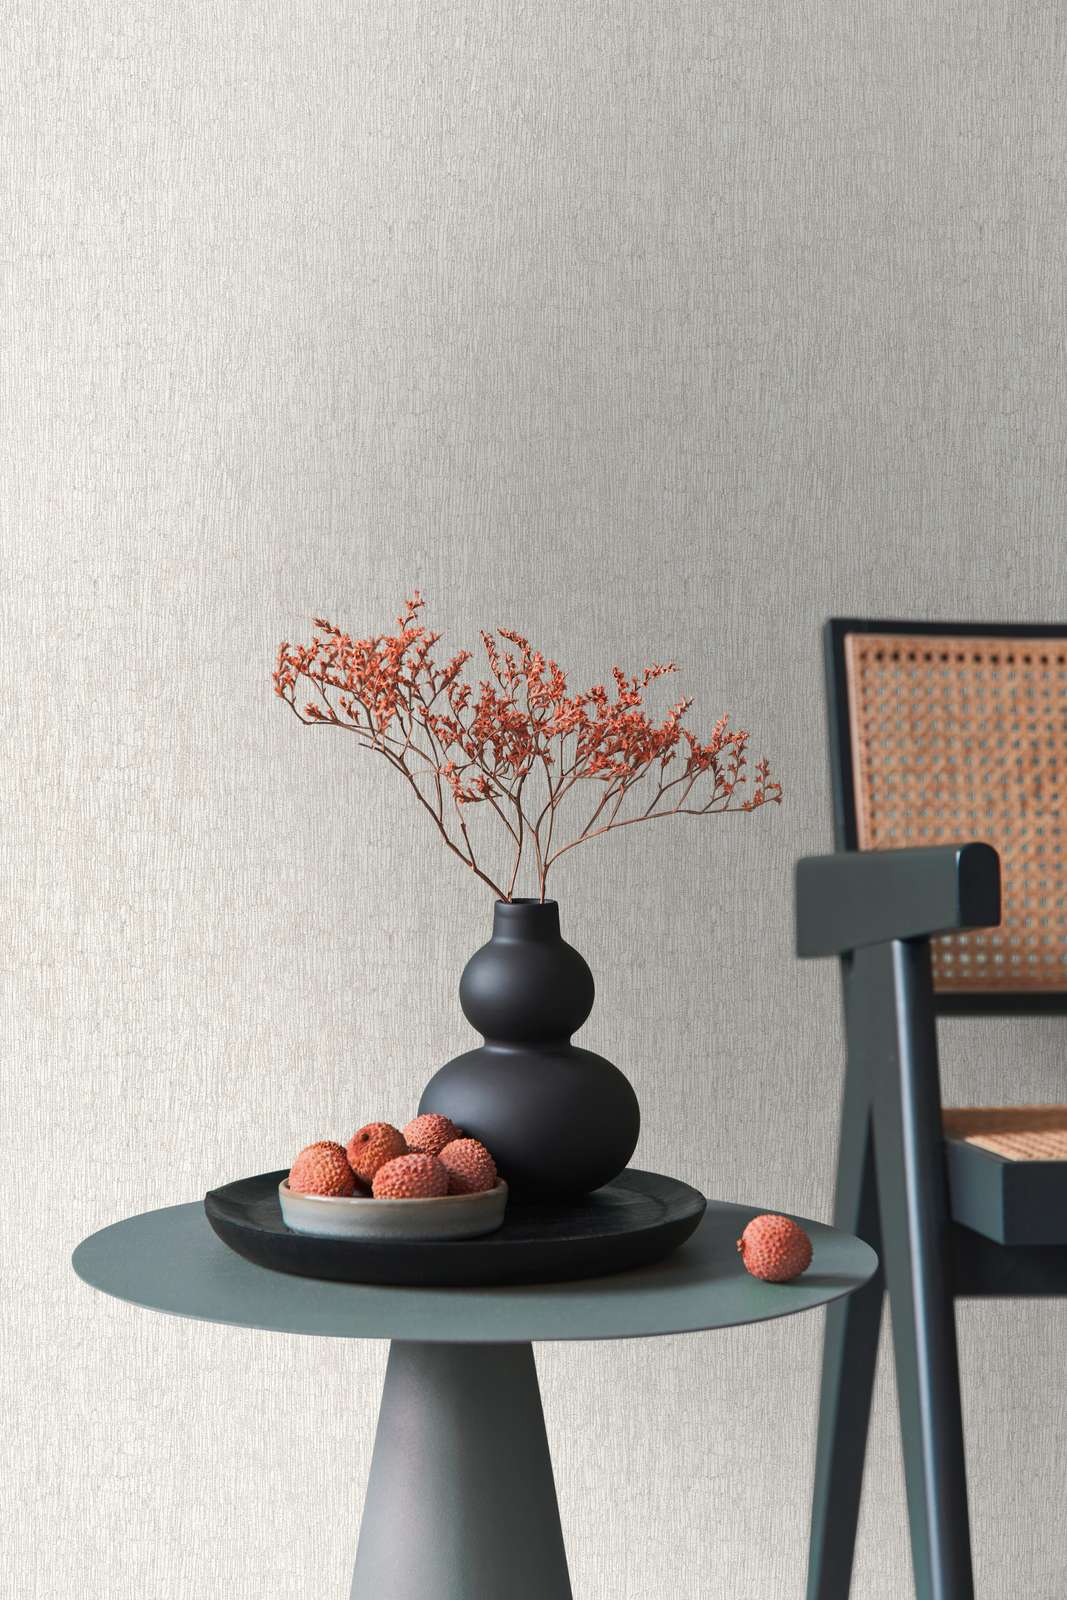             Non-woven wallpaper in textile look, slightly glossy - white, grey, silver
        